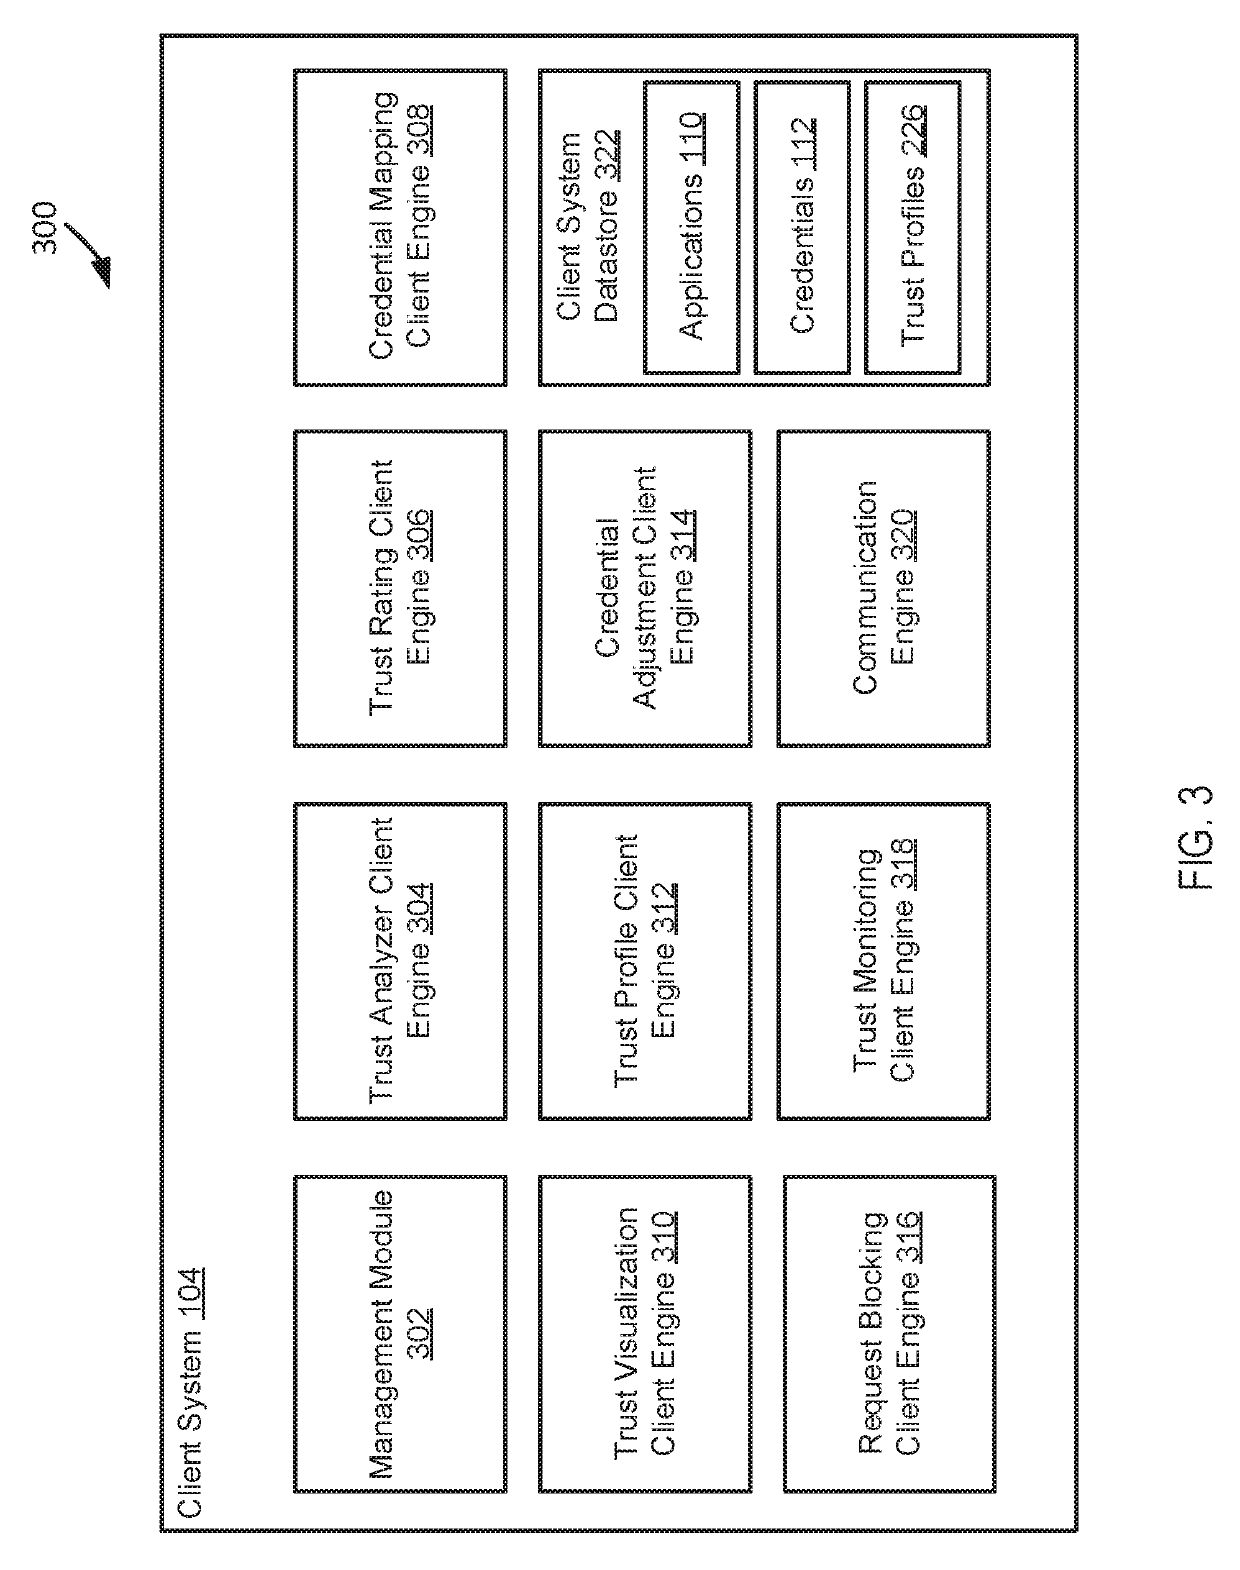 Systems and methods for analyzing, assessing and controlling trust and authentication in applications and devices